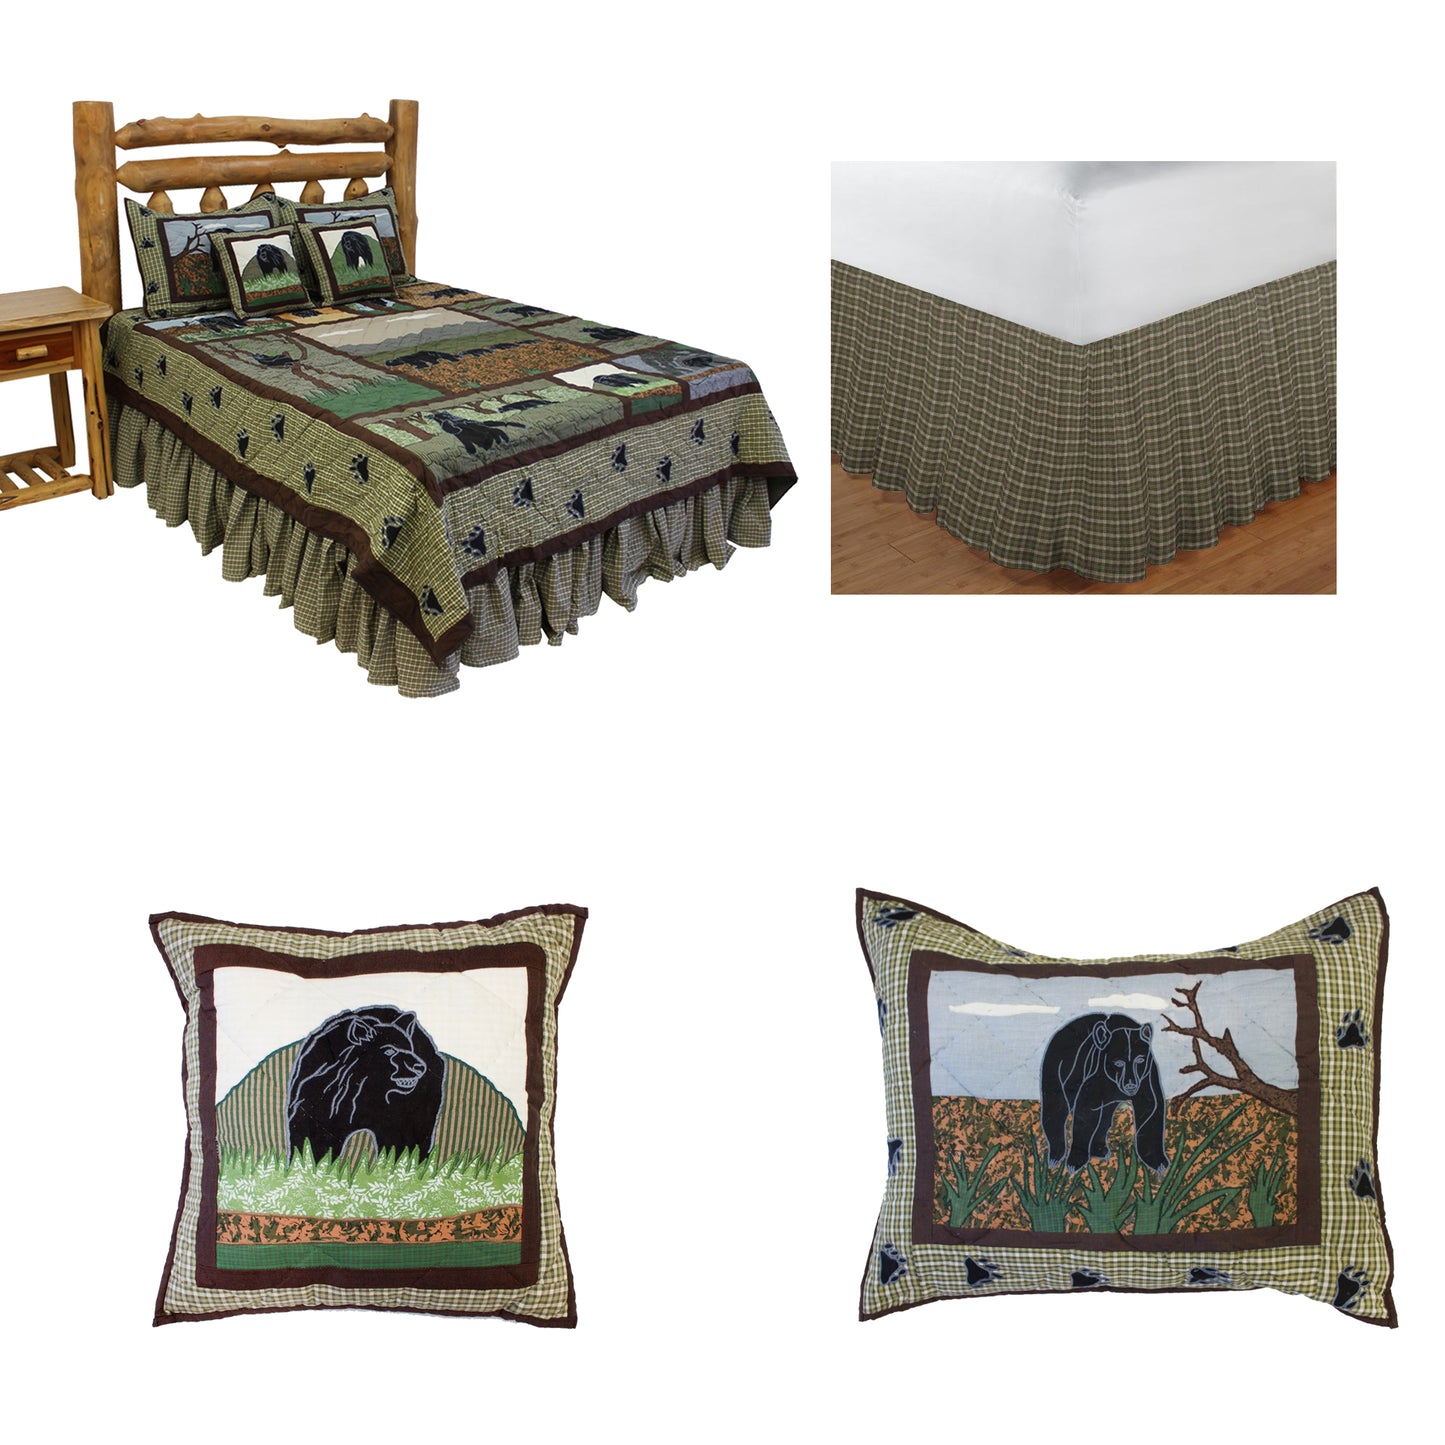 Poetry of bears Bedding accessories and Ensemble sets.